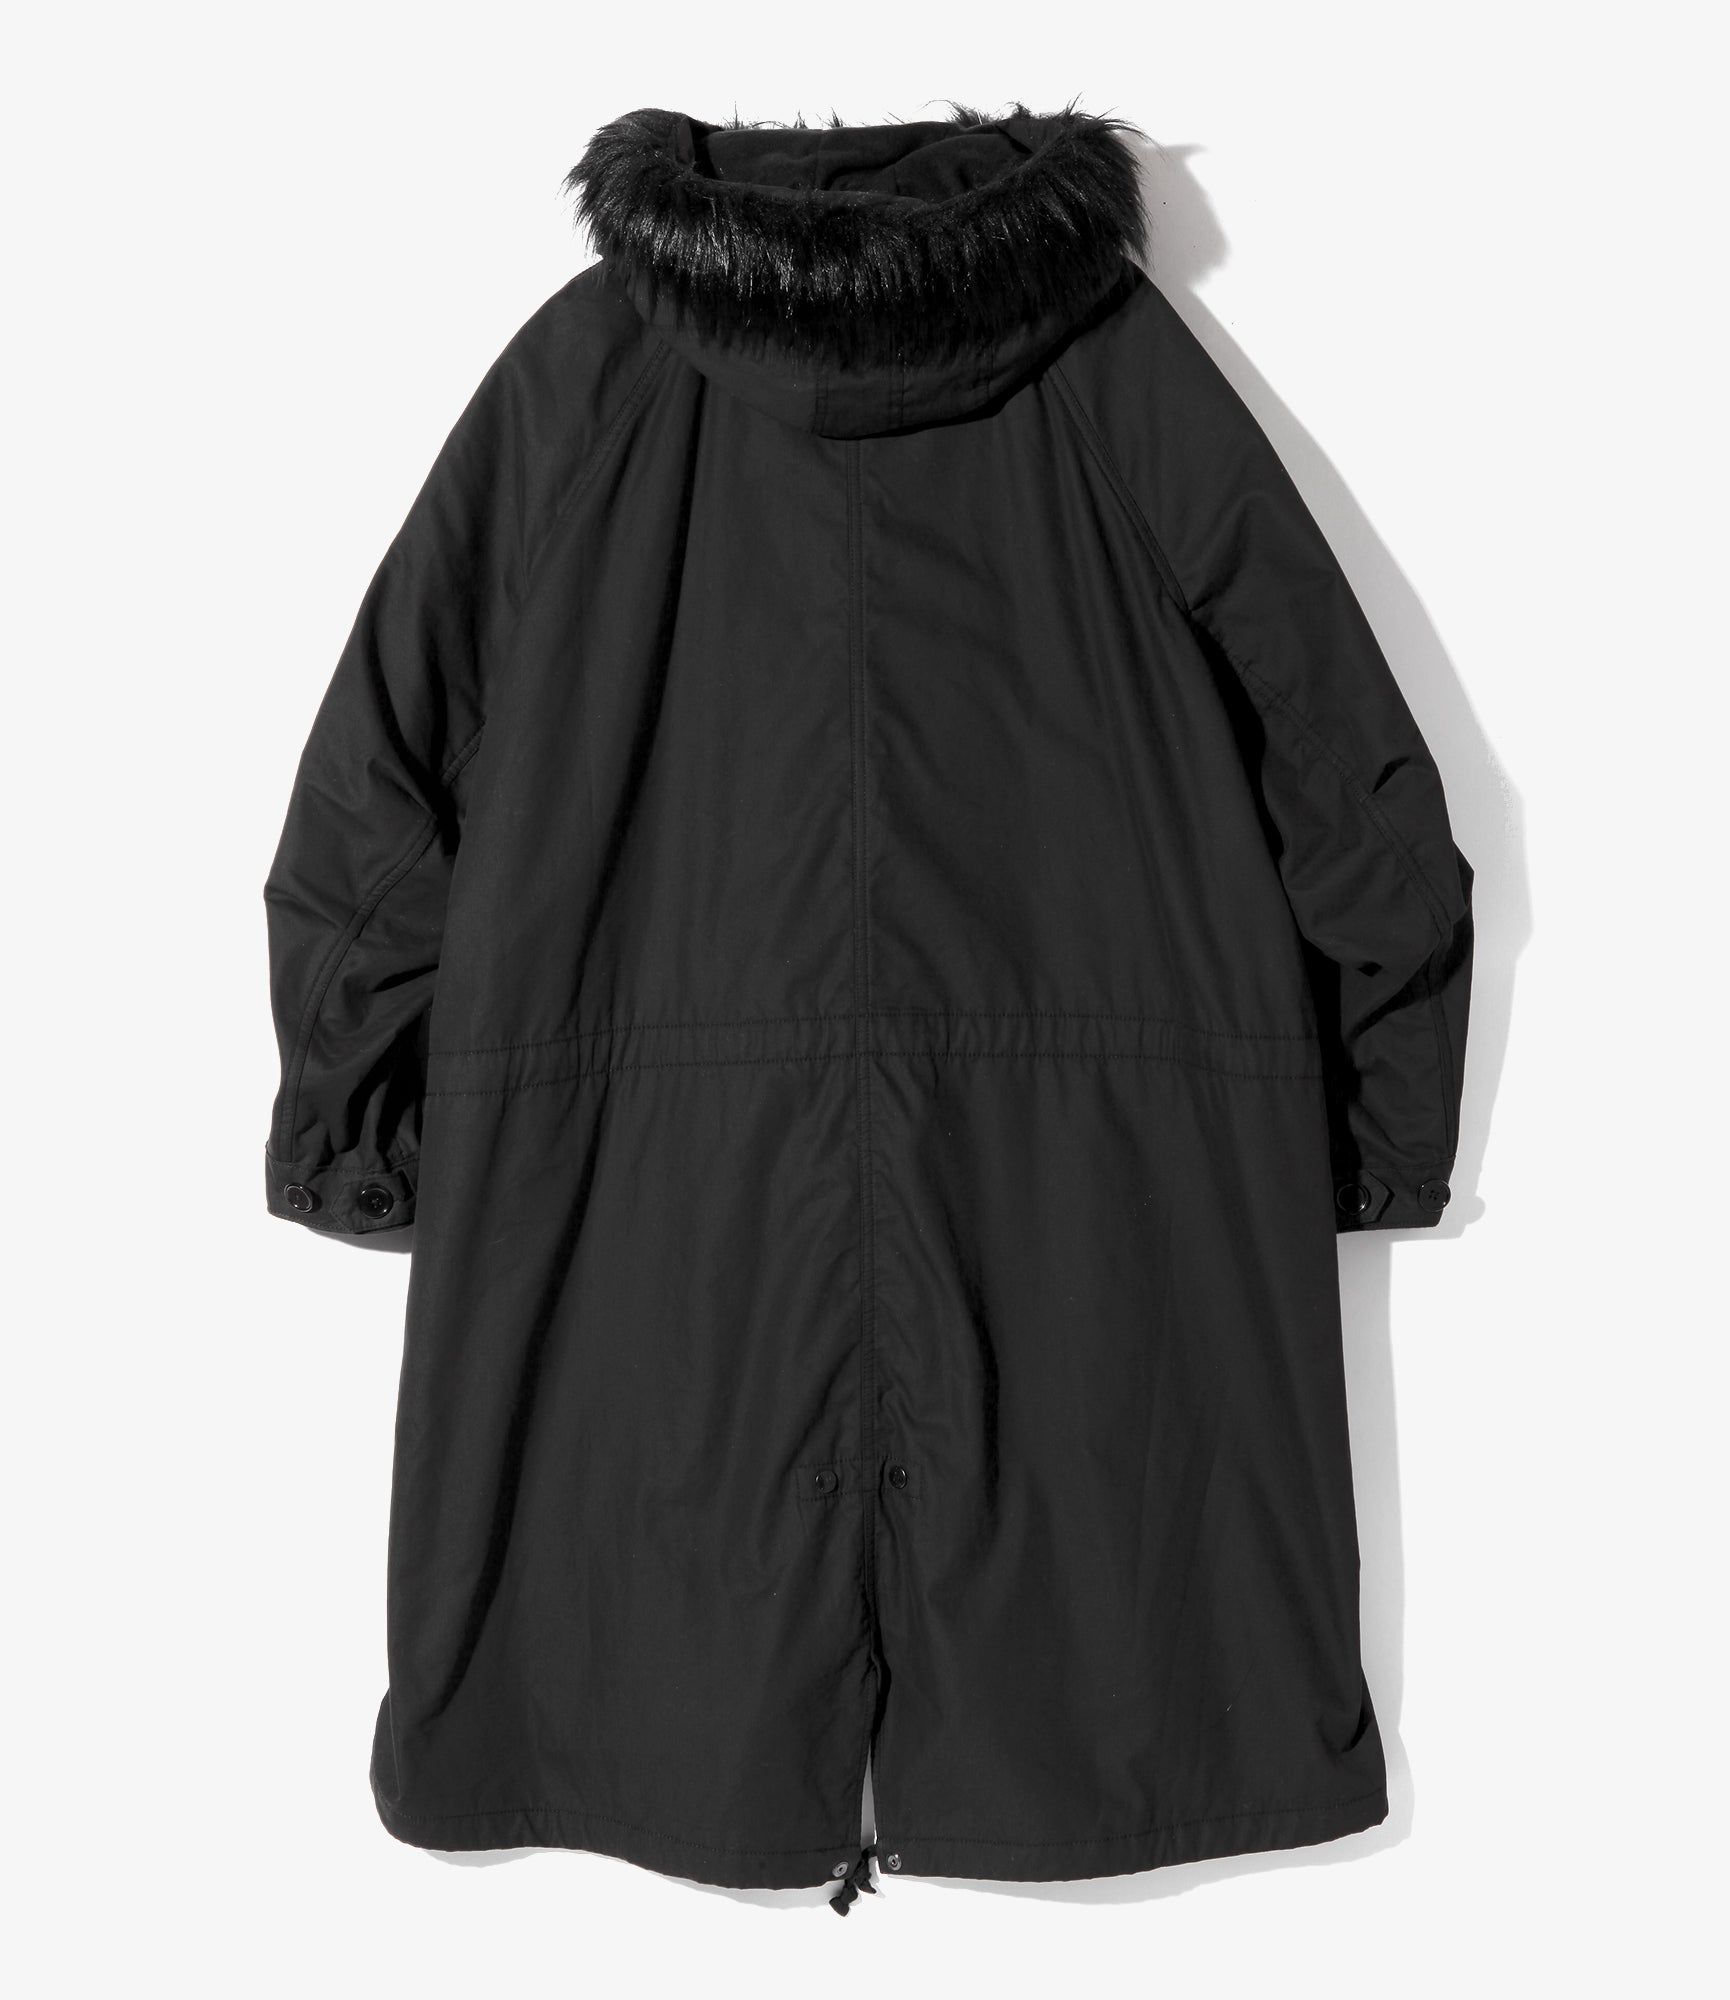 M-65 Type Cold Weather Parka - Peach Broadcloth - Black